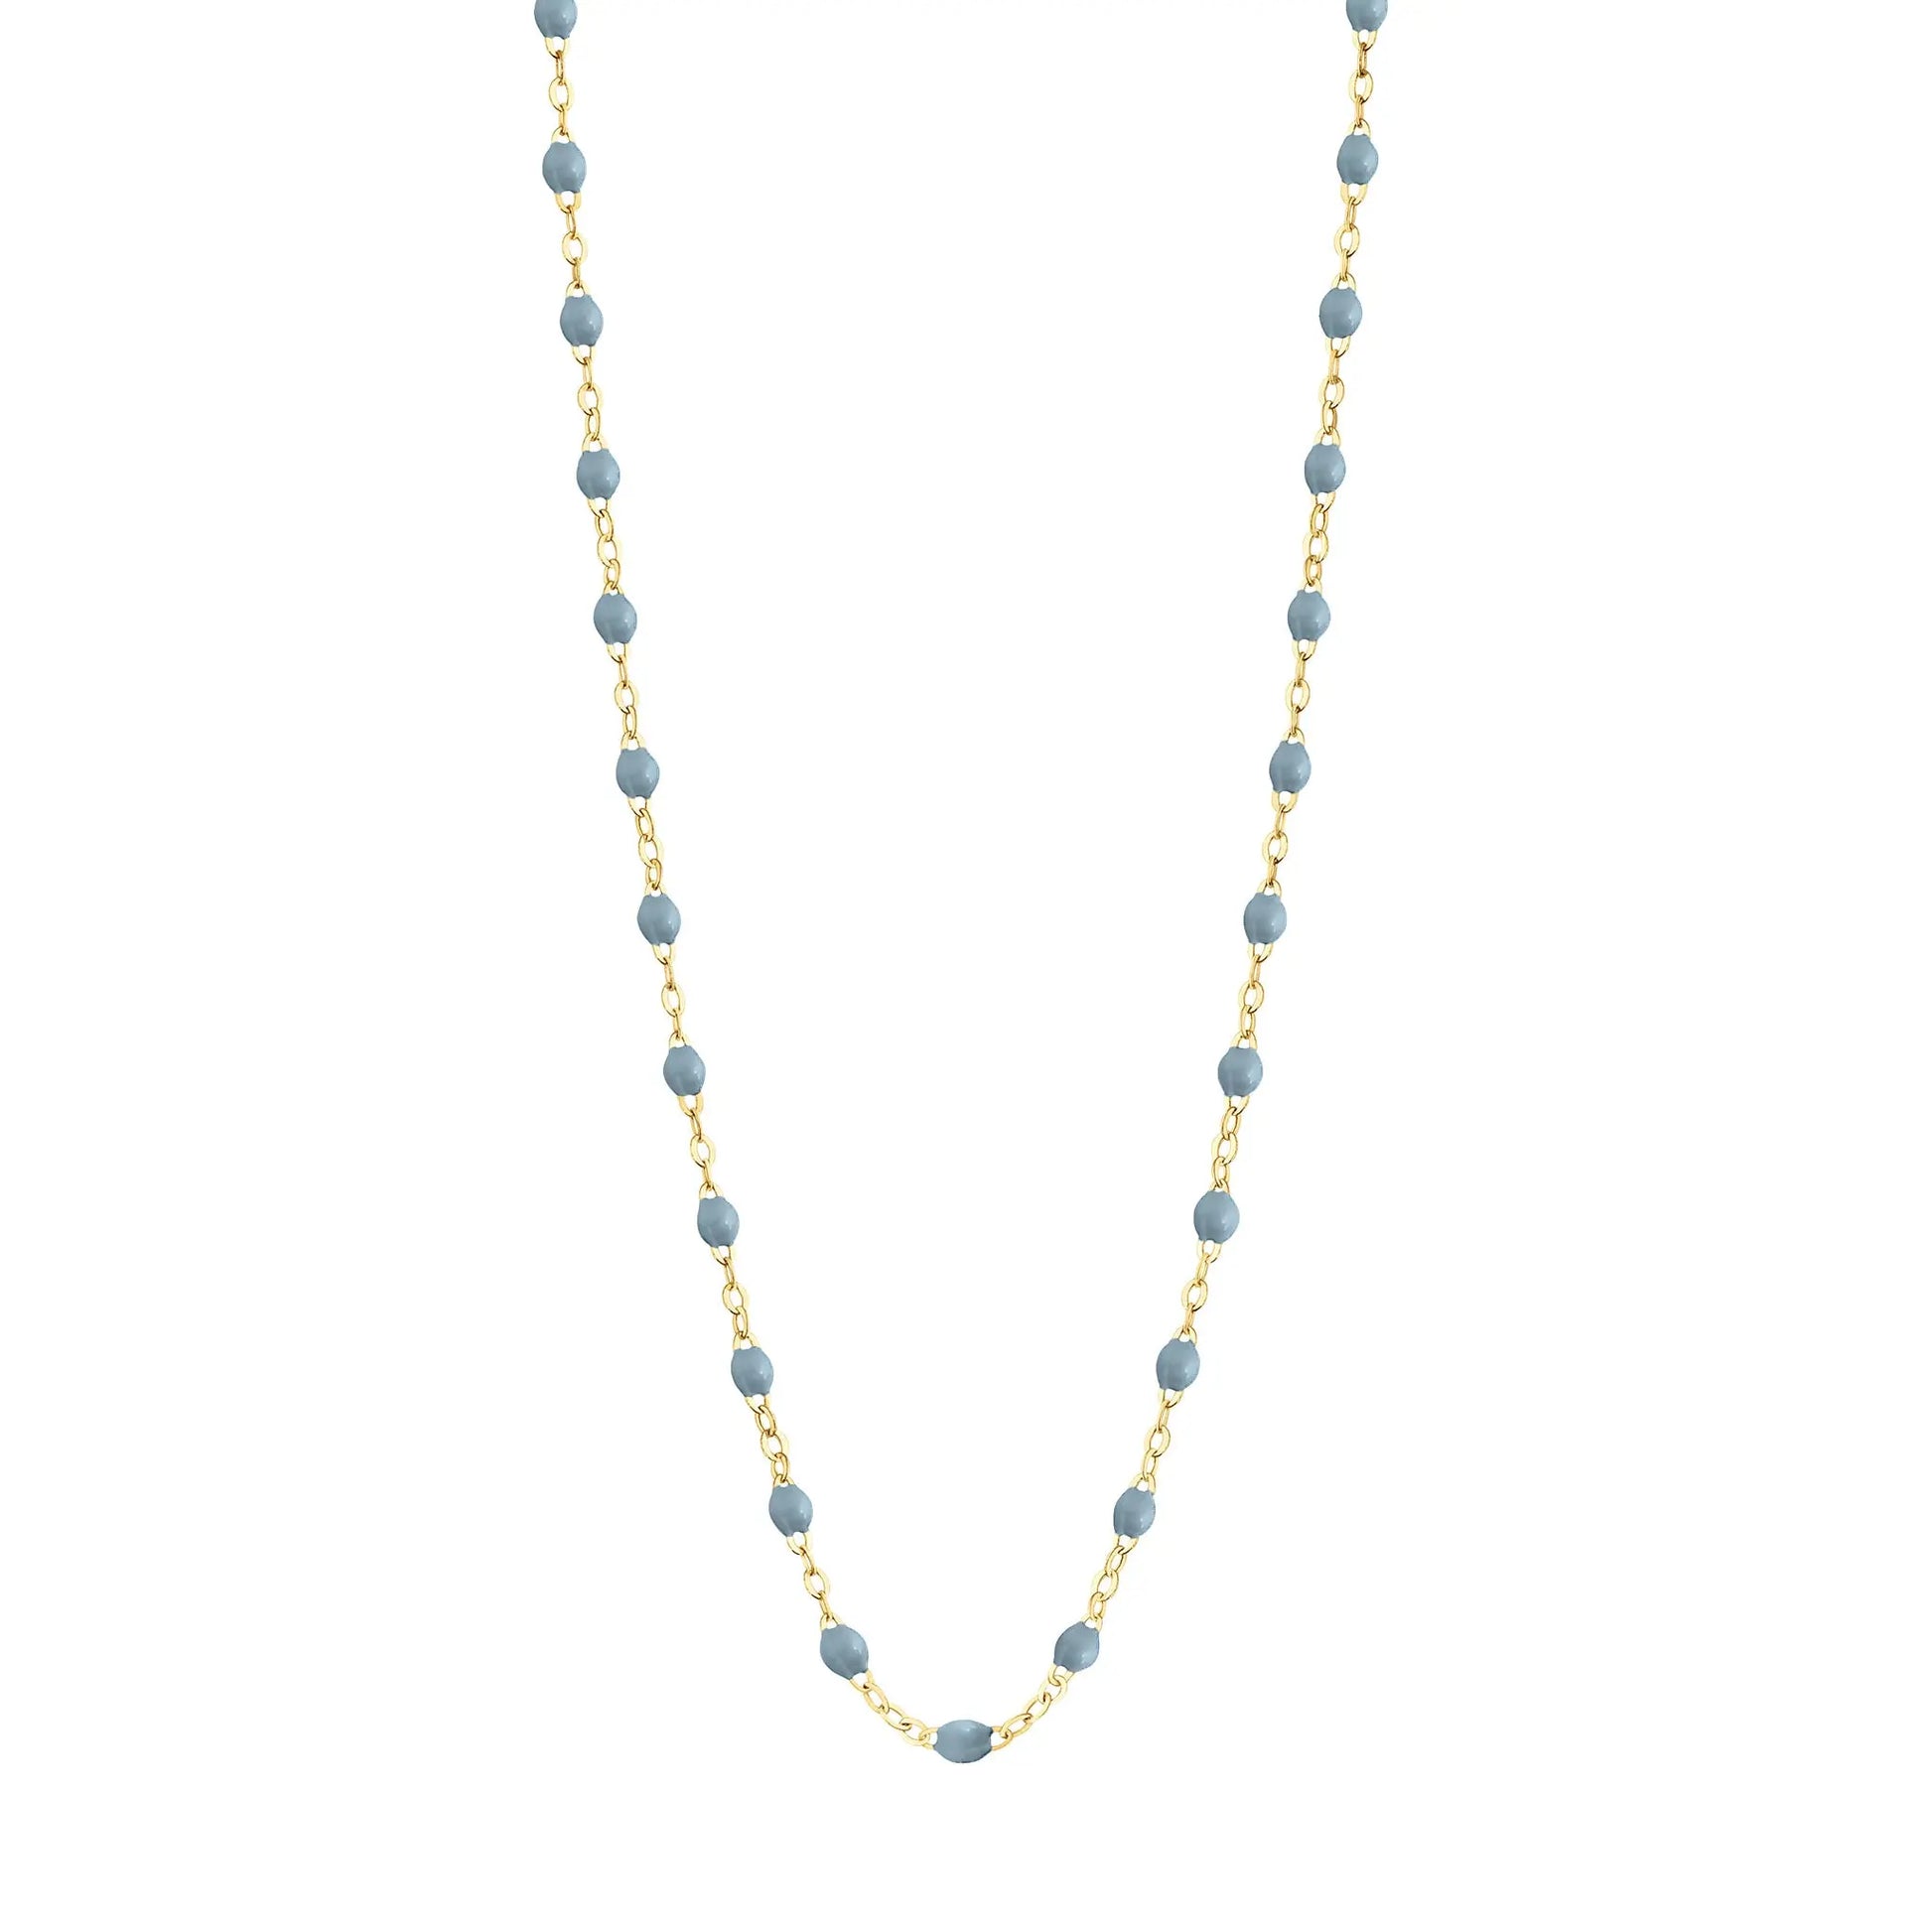 Stack you necklace layers with this versatile beaded chain! The Classic Gigi Necklace by gigi CLOZEAU features 18 carat yellow gold, and striking Jeans resin jewels for an everyday effortless appearance. Handcrafted in 18k yellow gold. The beads measure 1.50mm in diameter and is finished with a spring ring clasp. The length is 19.7 inches.